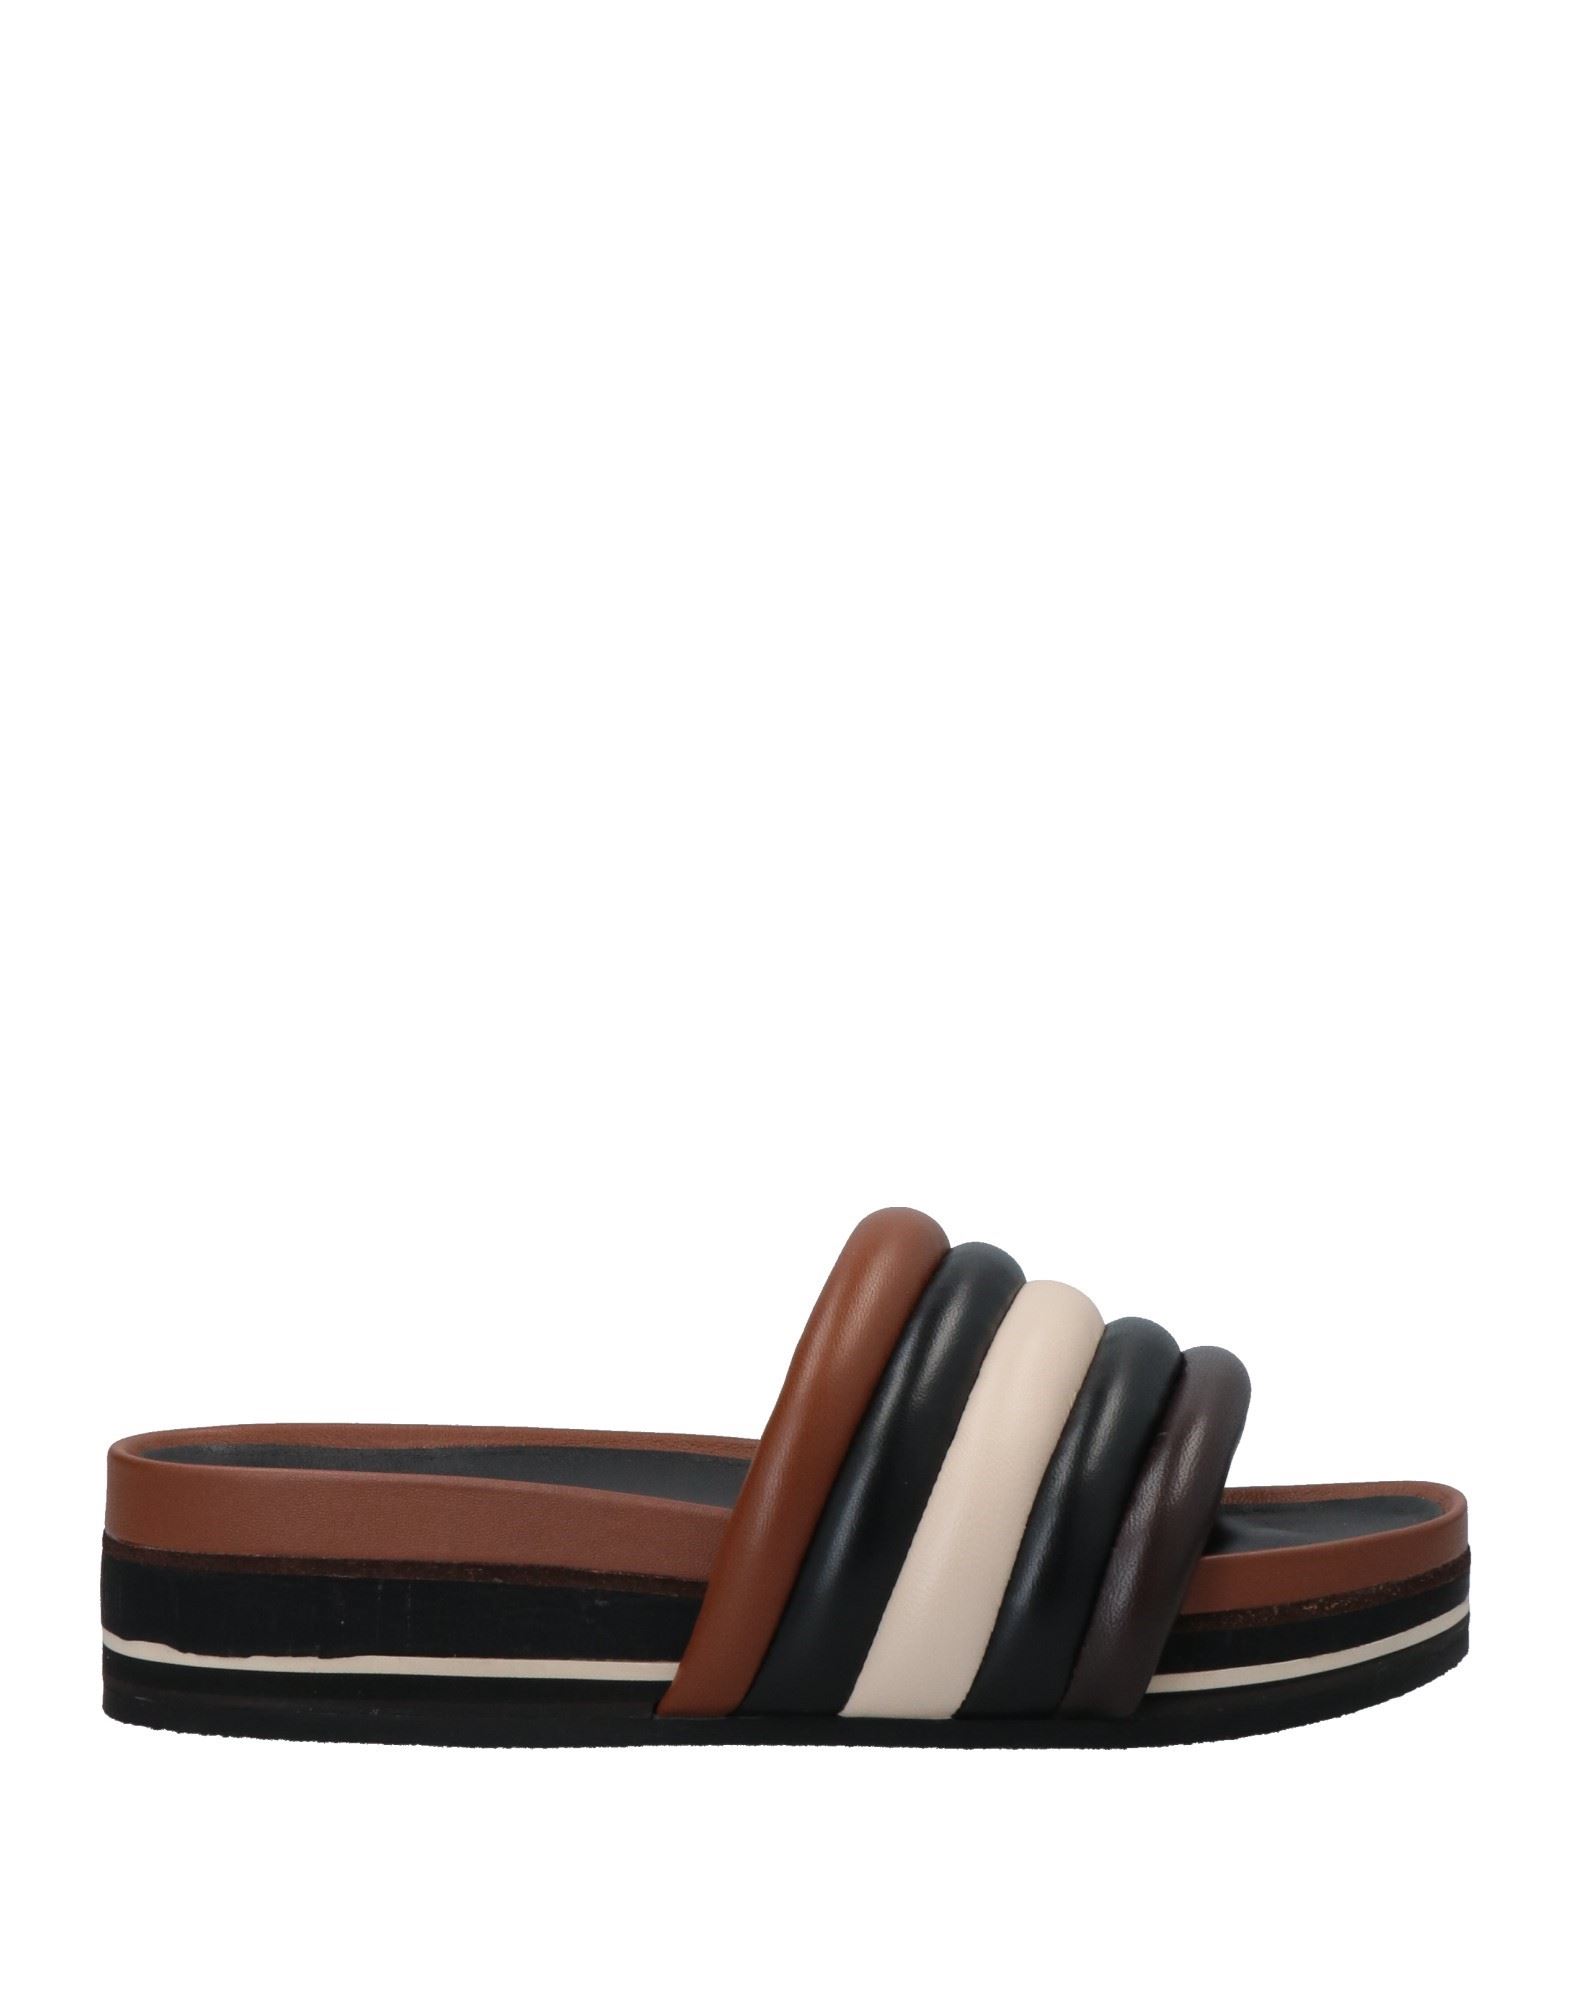 Women's TORY BURCH Sandals Sale, Up To 70% Off | ModeSens